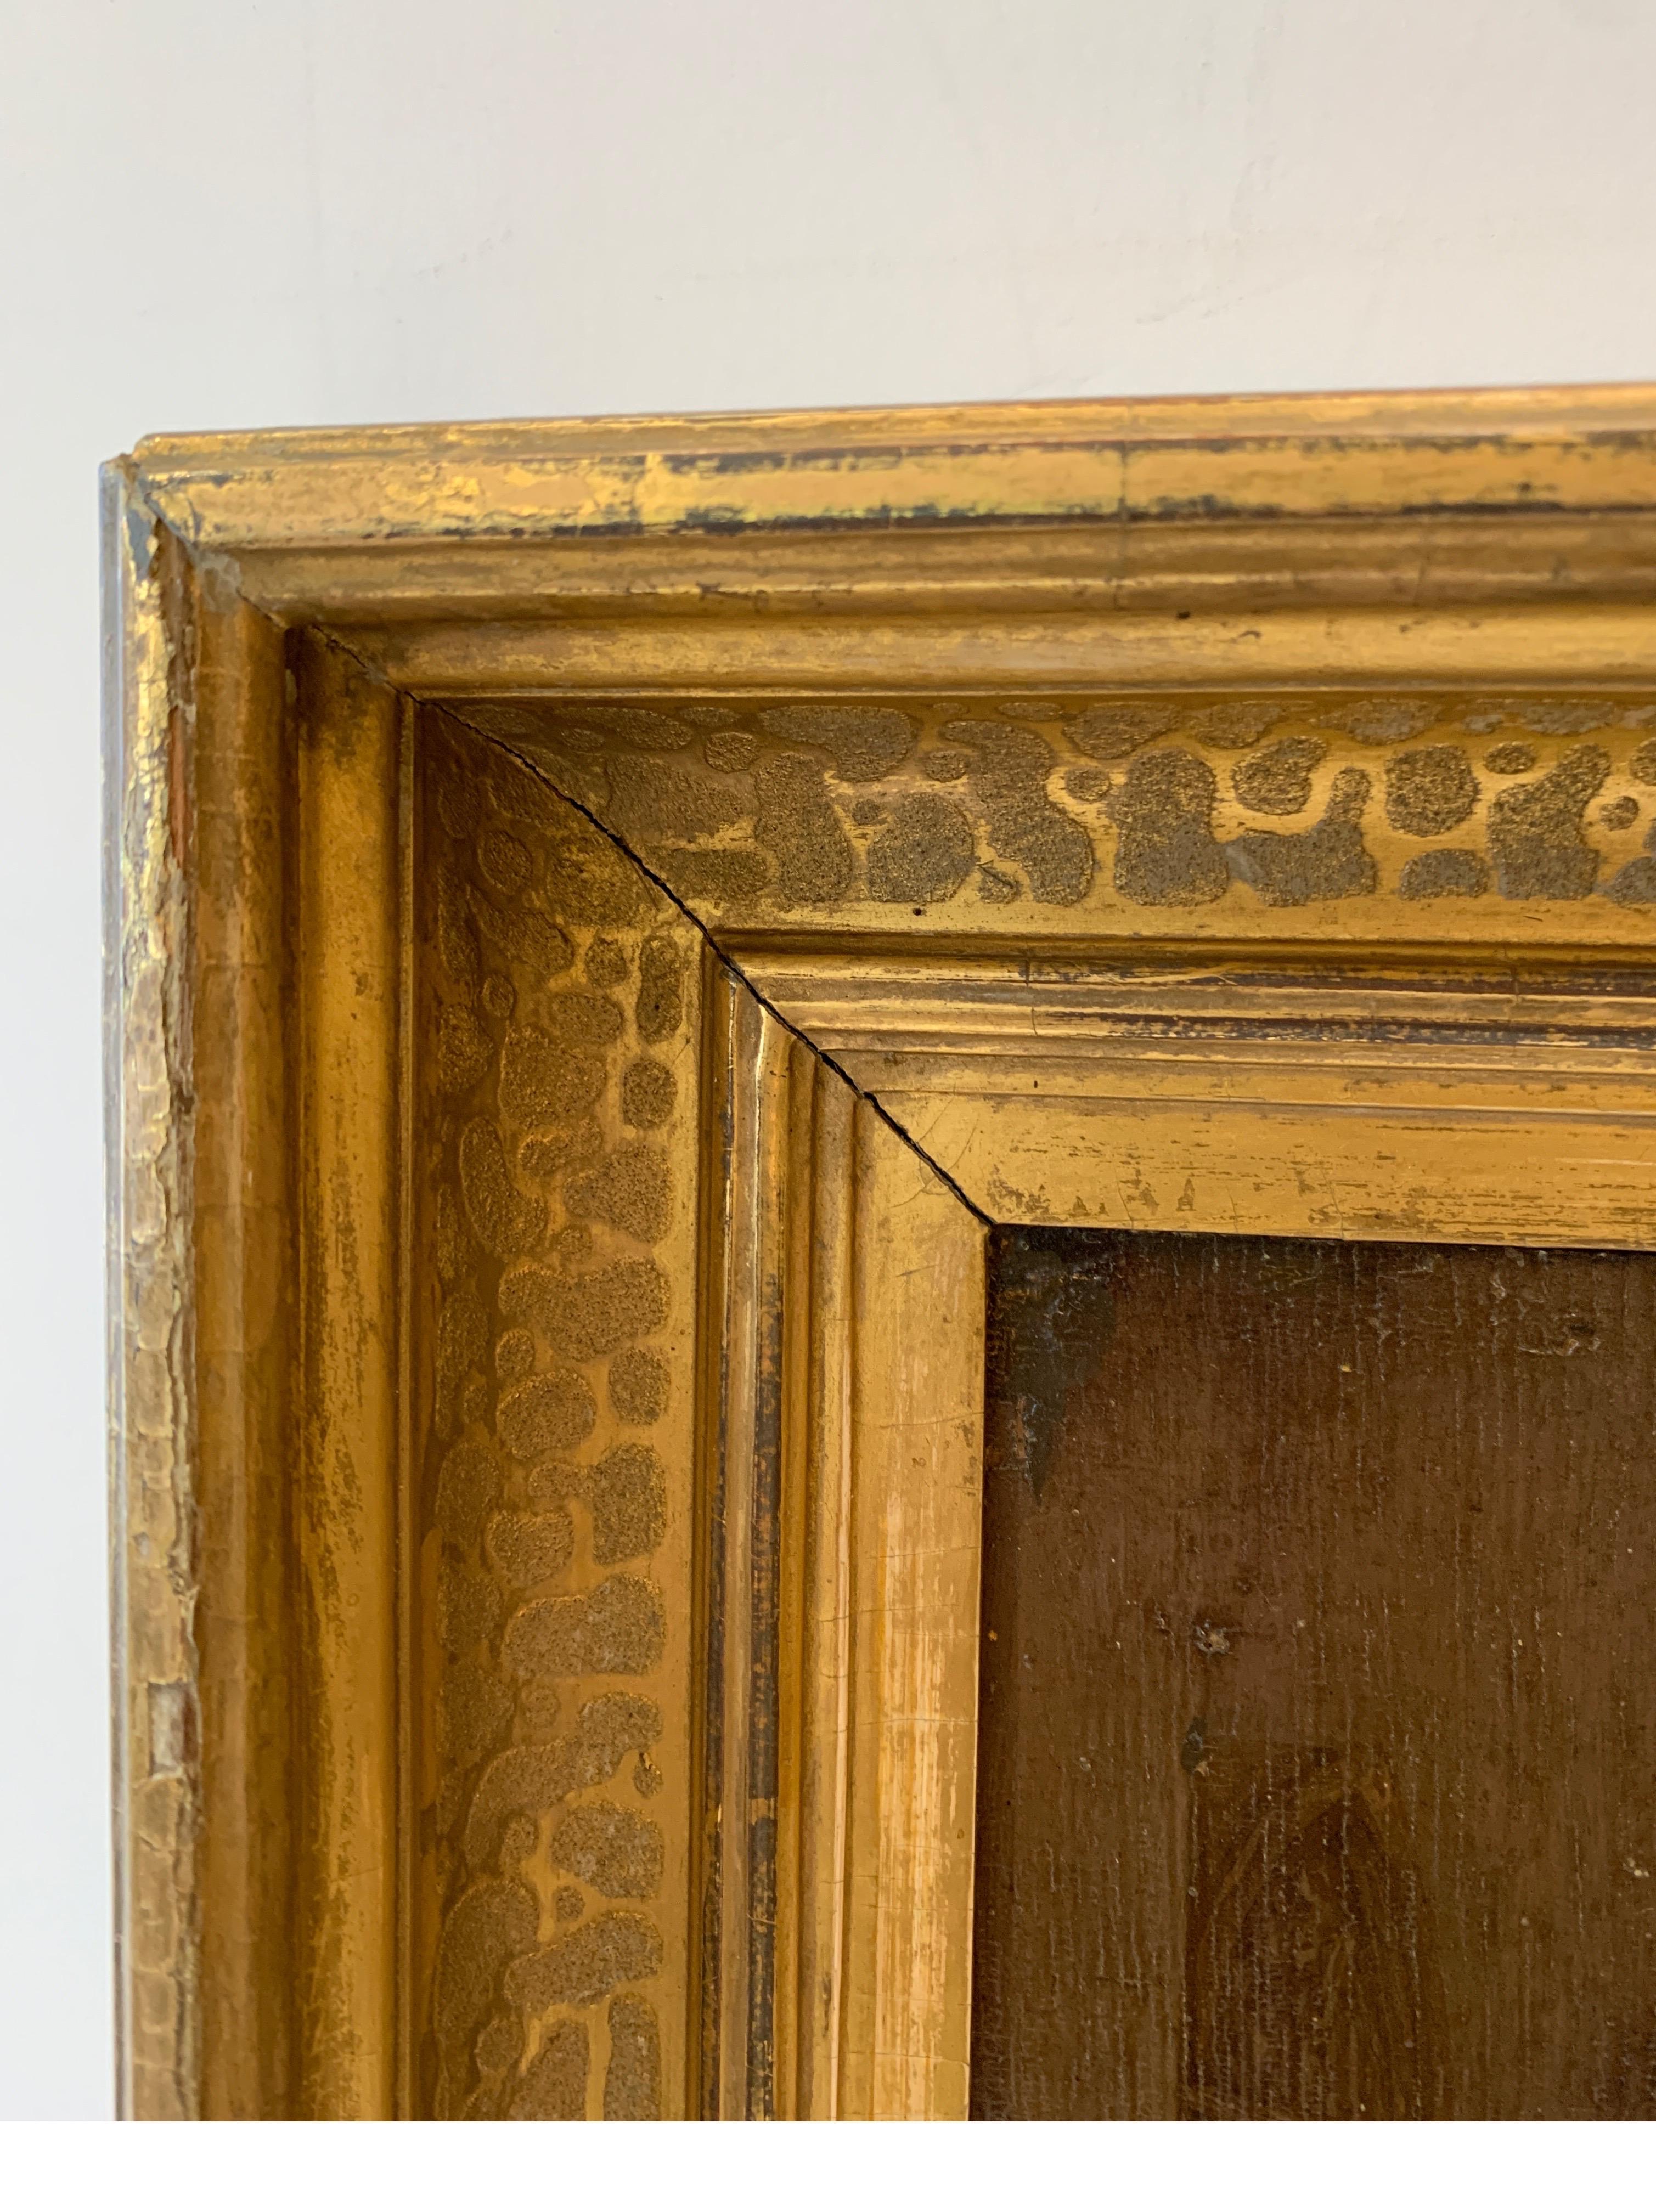 Cavalier Oil Painting on Paper Applied to Wood in a Giltwood Frame, circa 1850 For Sale 3